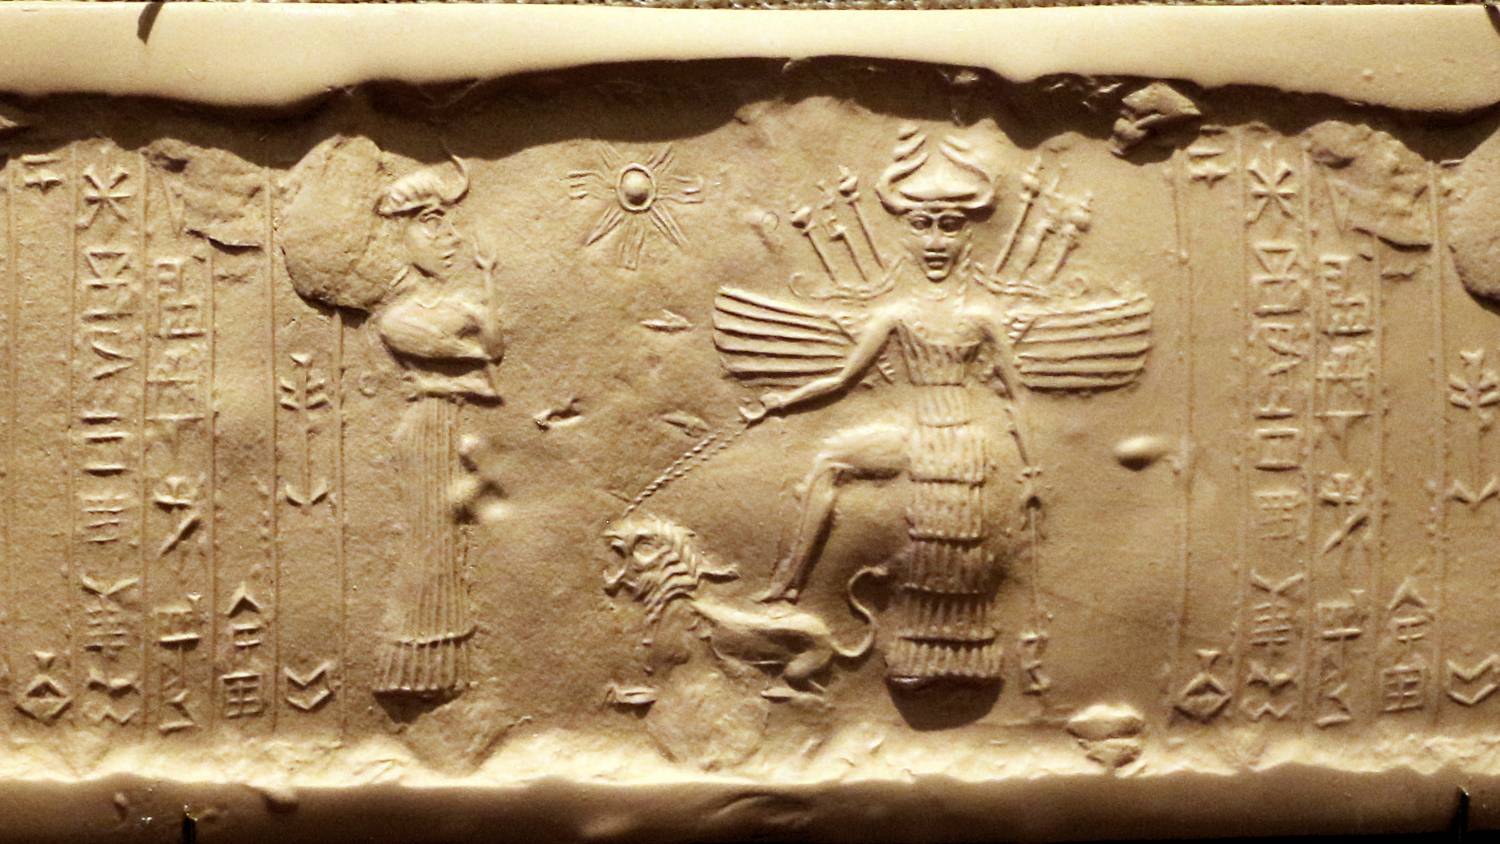 Inanna, also known as Ishtar is an ancient goddess associated with the planet Venus (CC/Wikipedia)